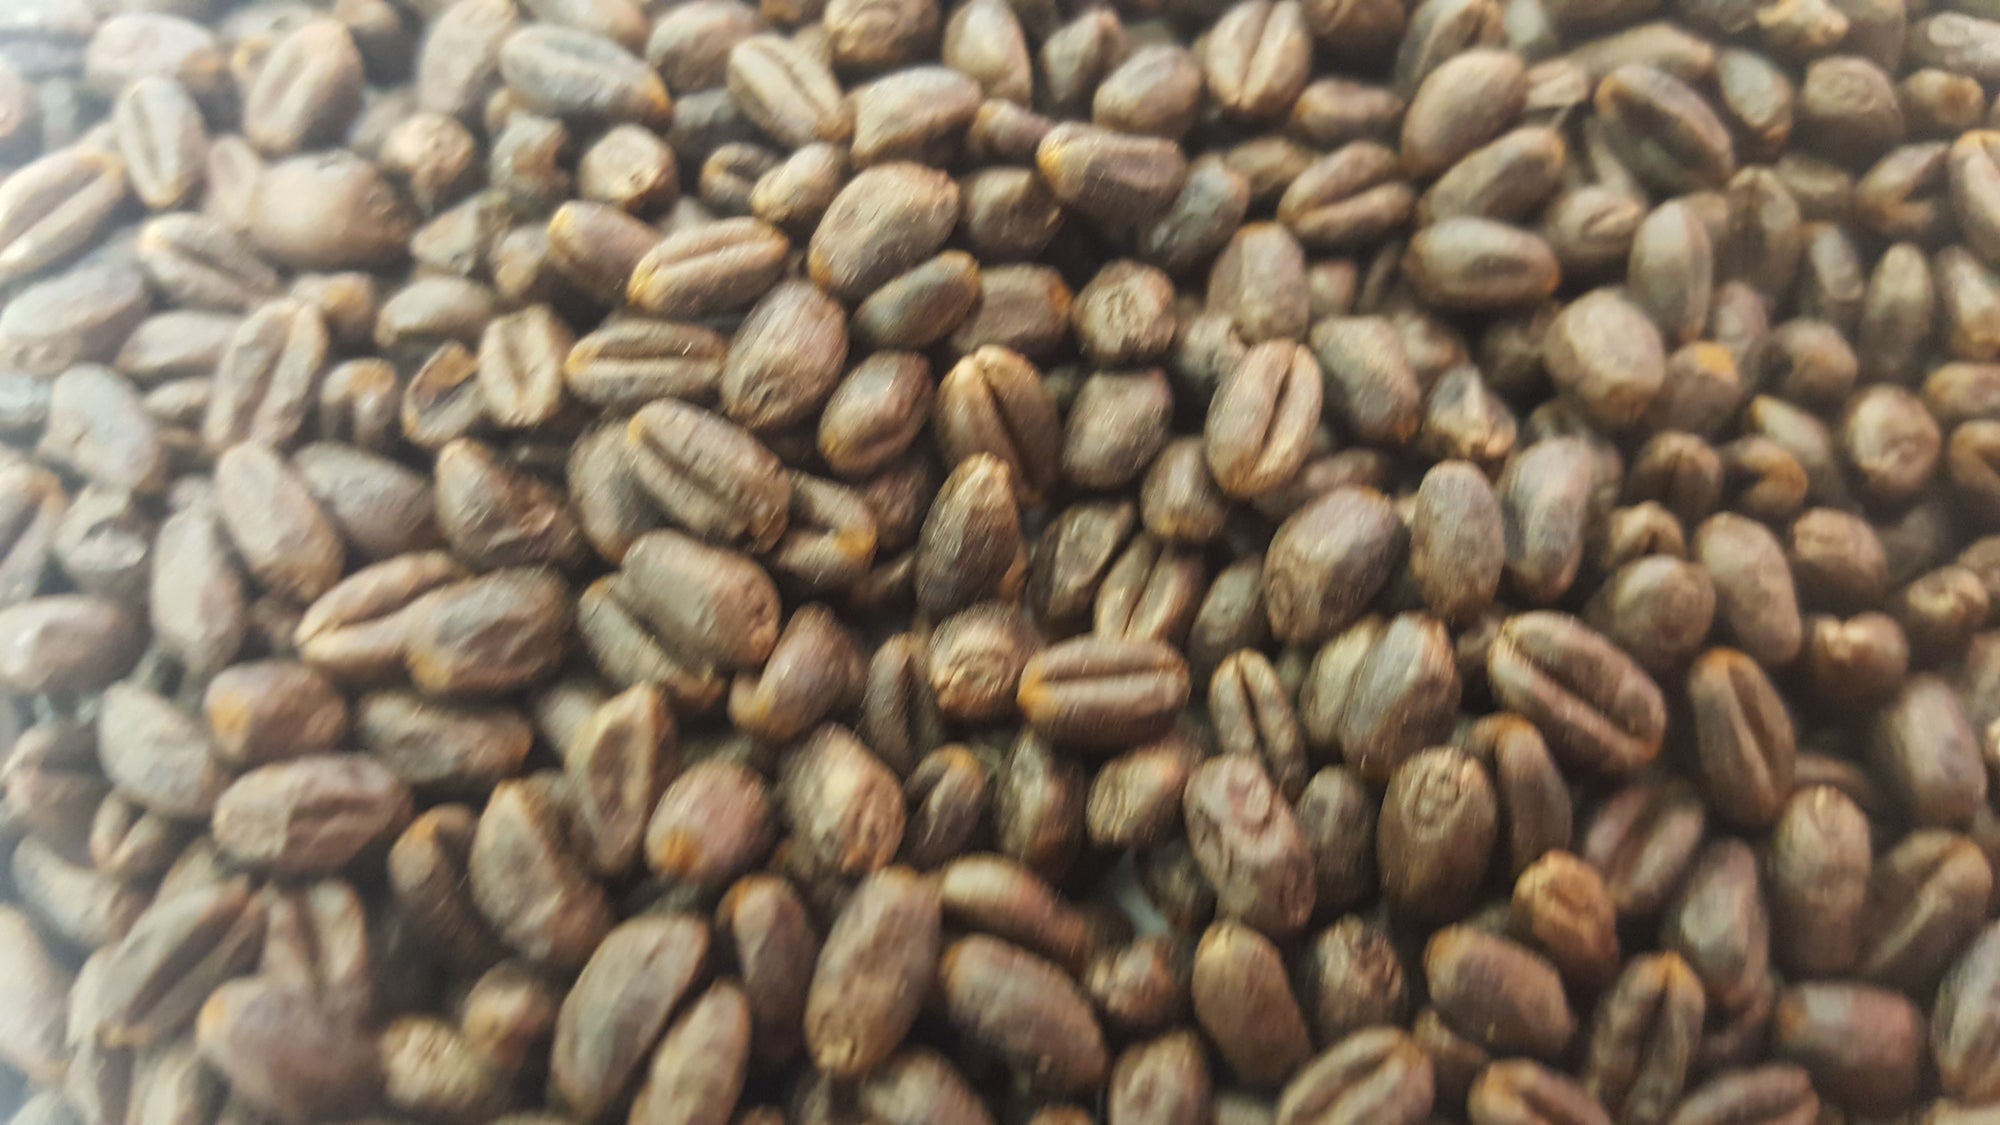 Gladfield Roasted Wheat - All Things Fermented | Home Brew Shop NZ | Supplies | Equipment